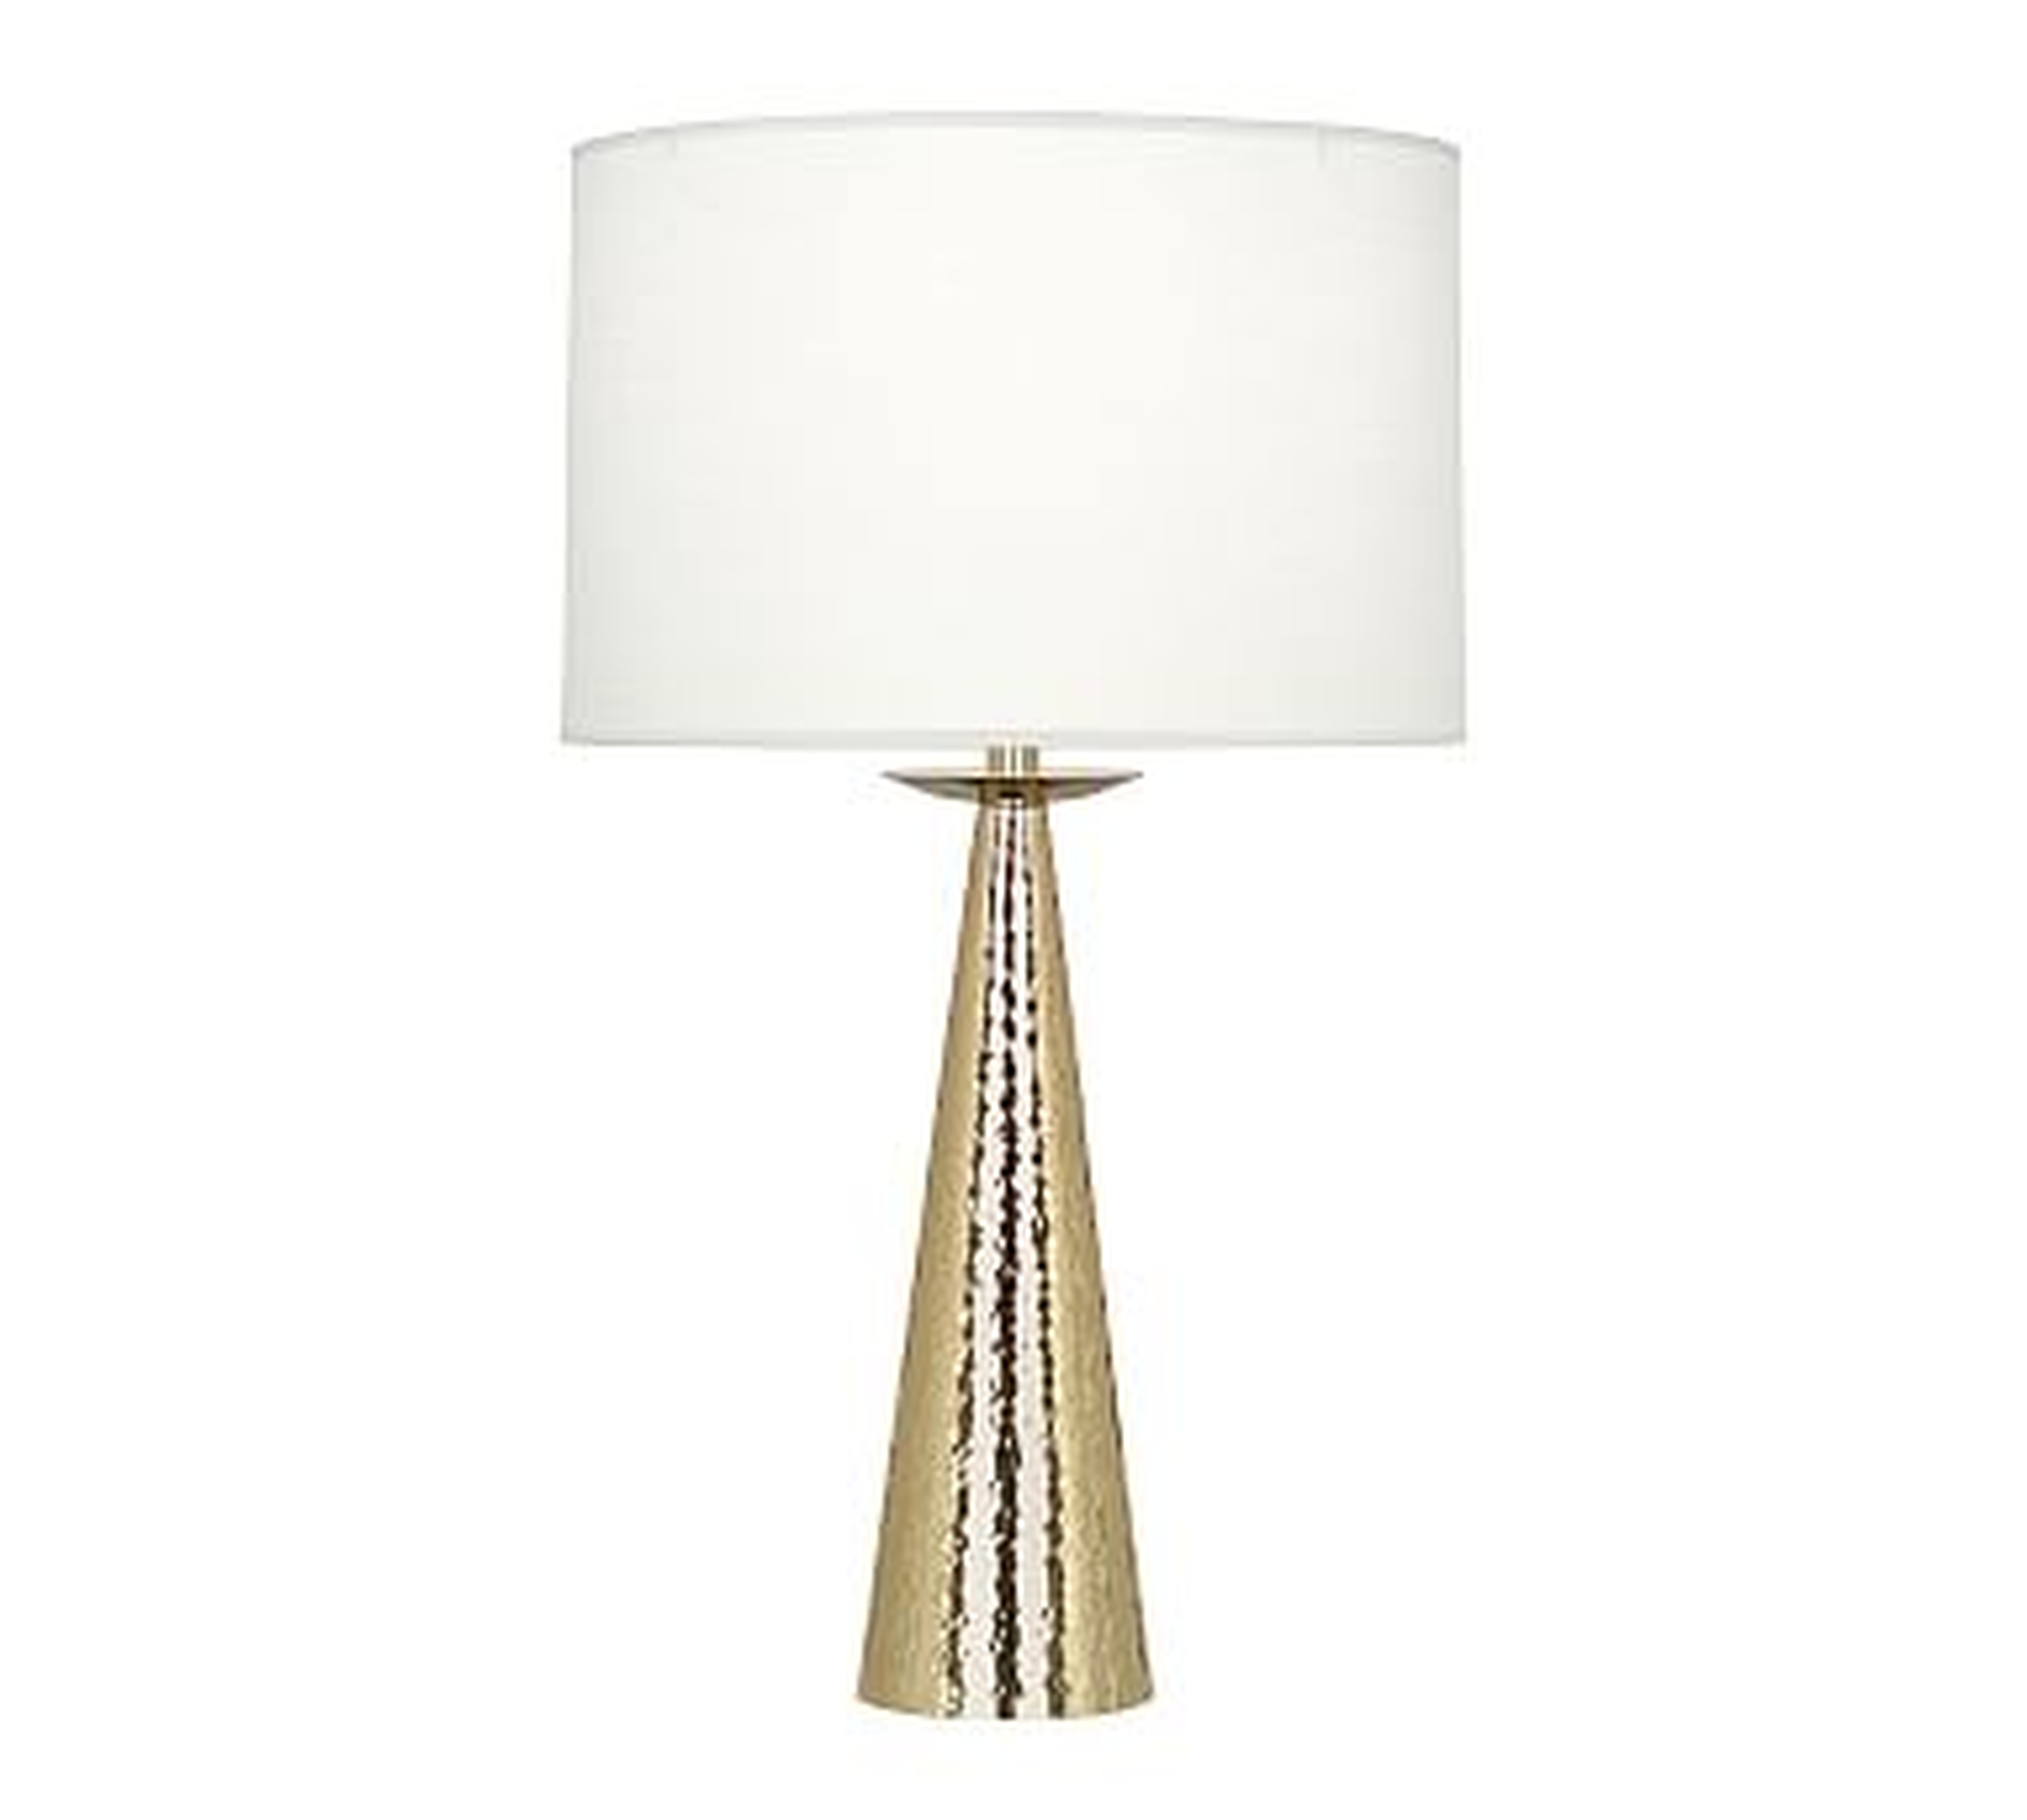 Danielle Large Tapered Table Lamp, Brass - Pottery Barn